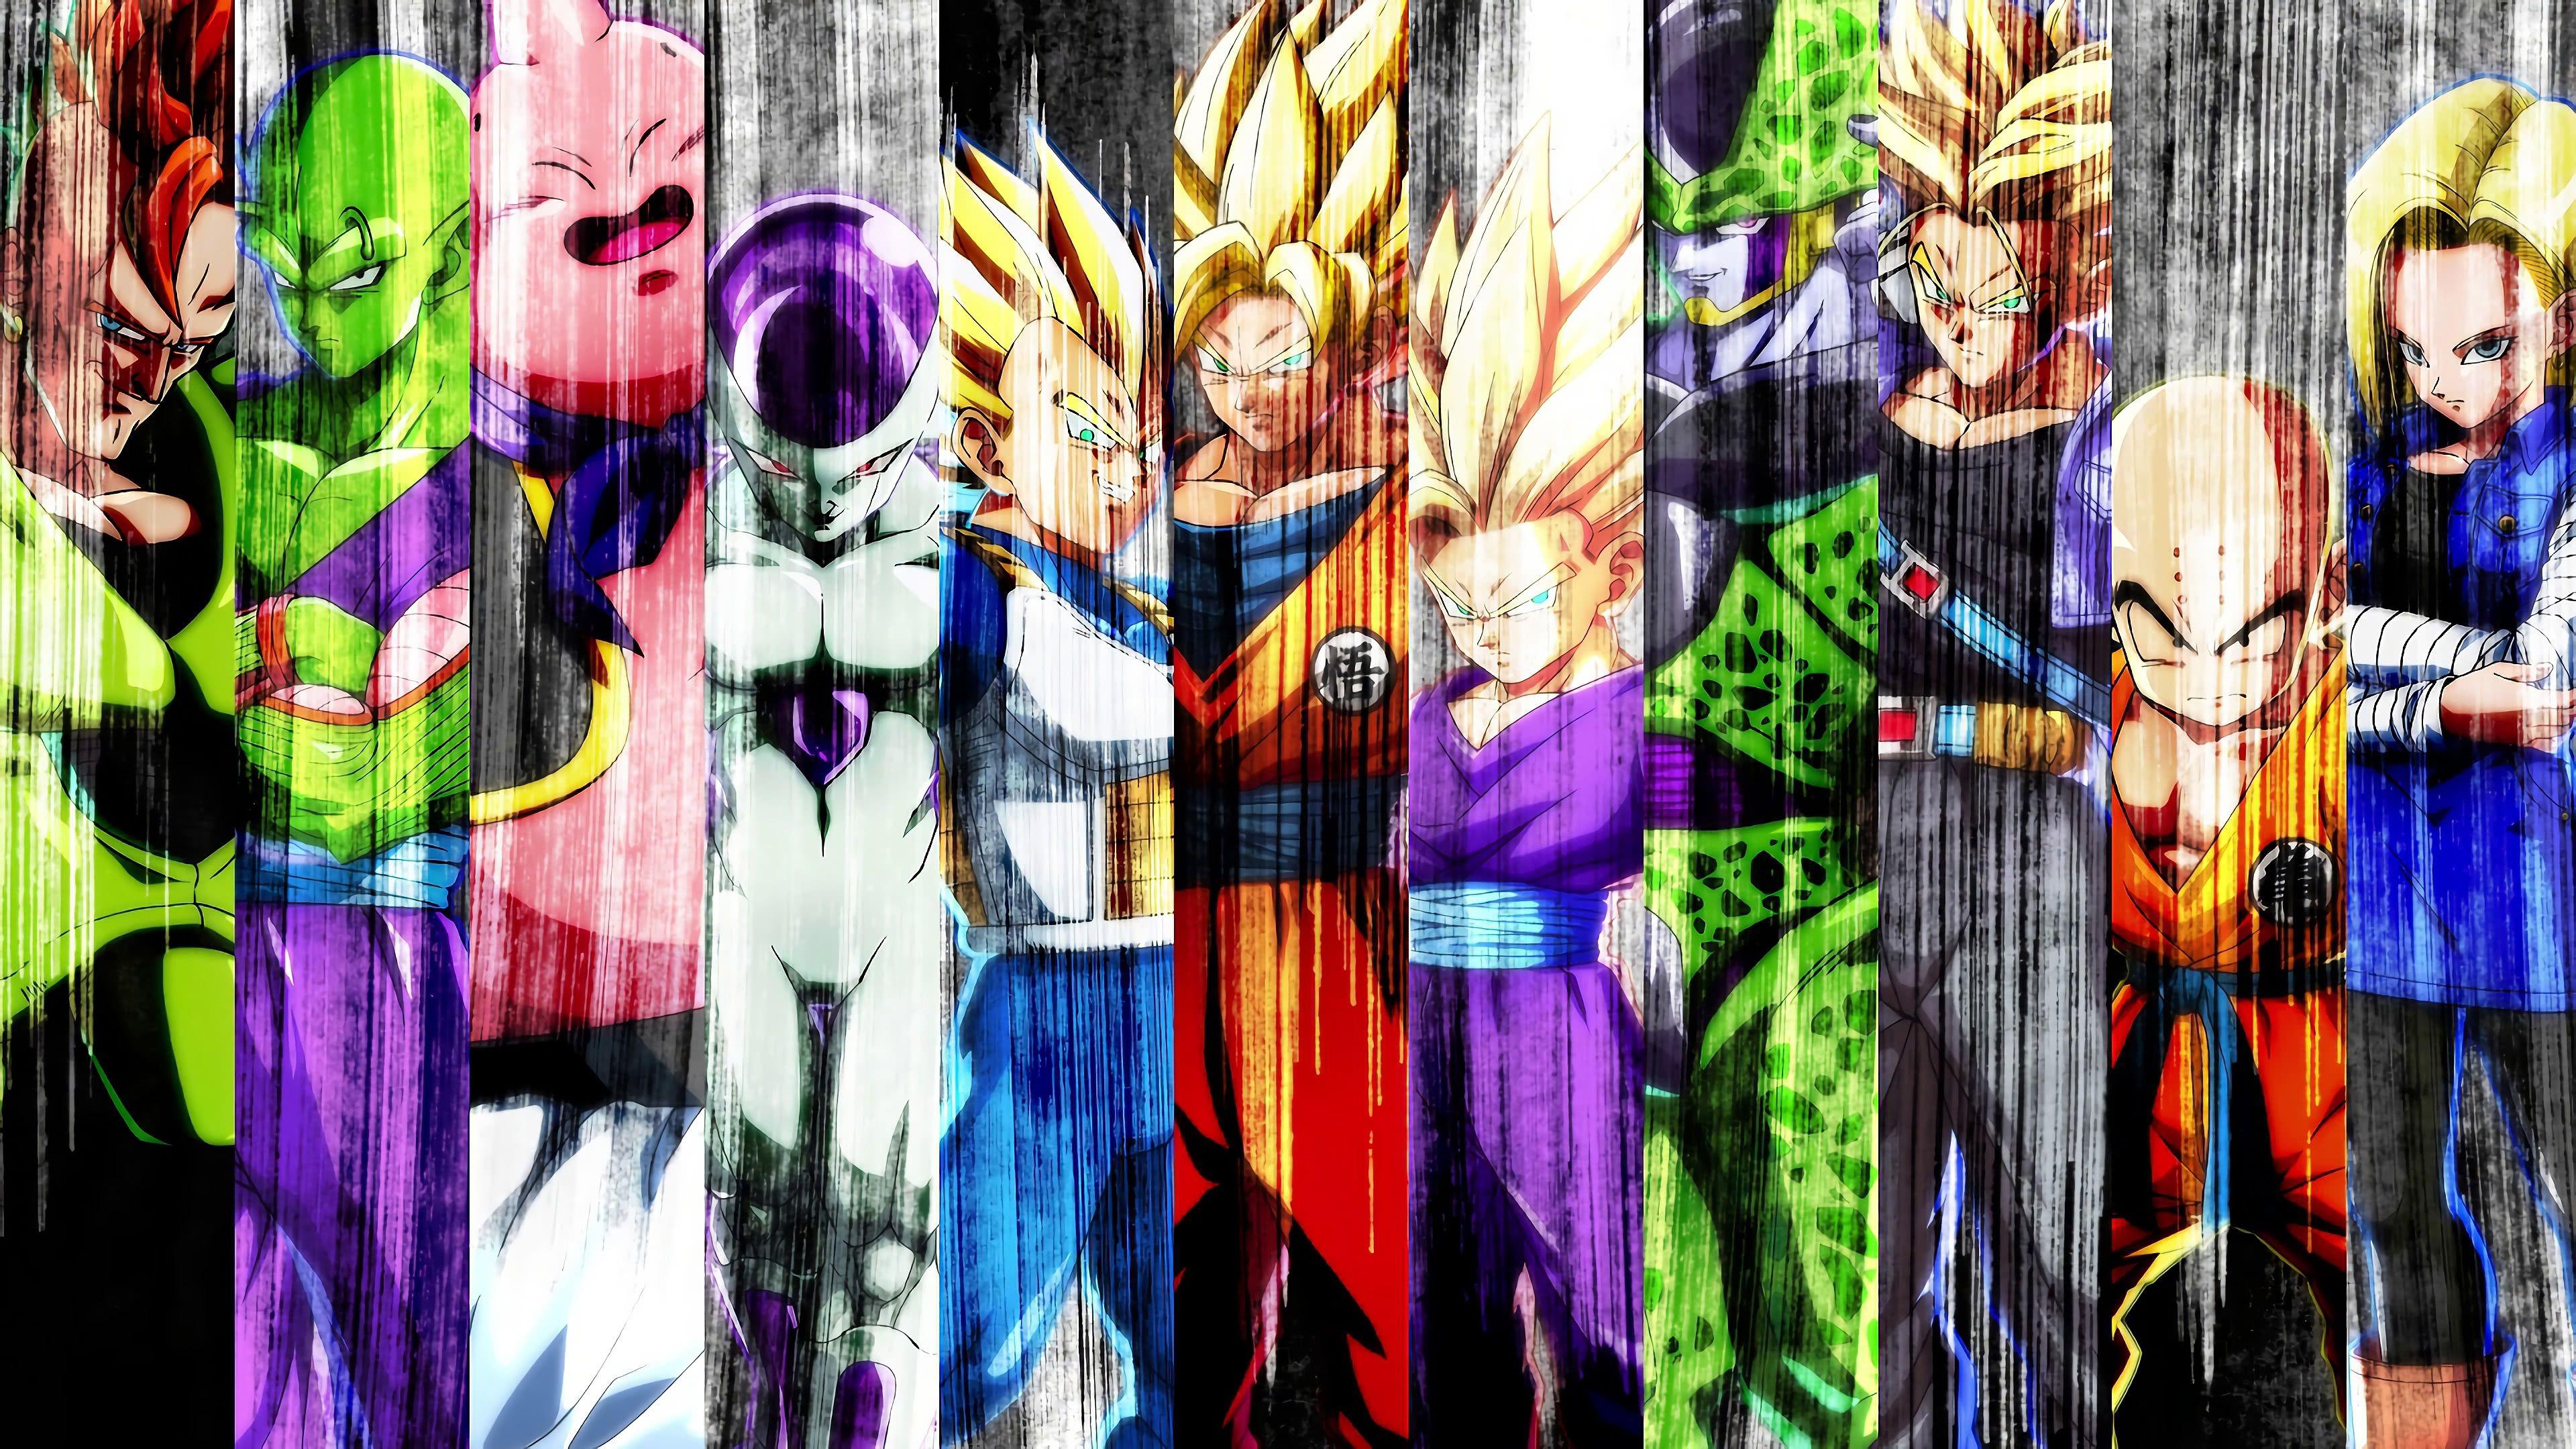 Dragon Ball FighterZ Wallpapers - Top Free Dragon Ball ...